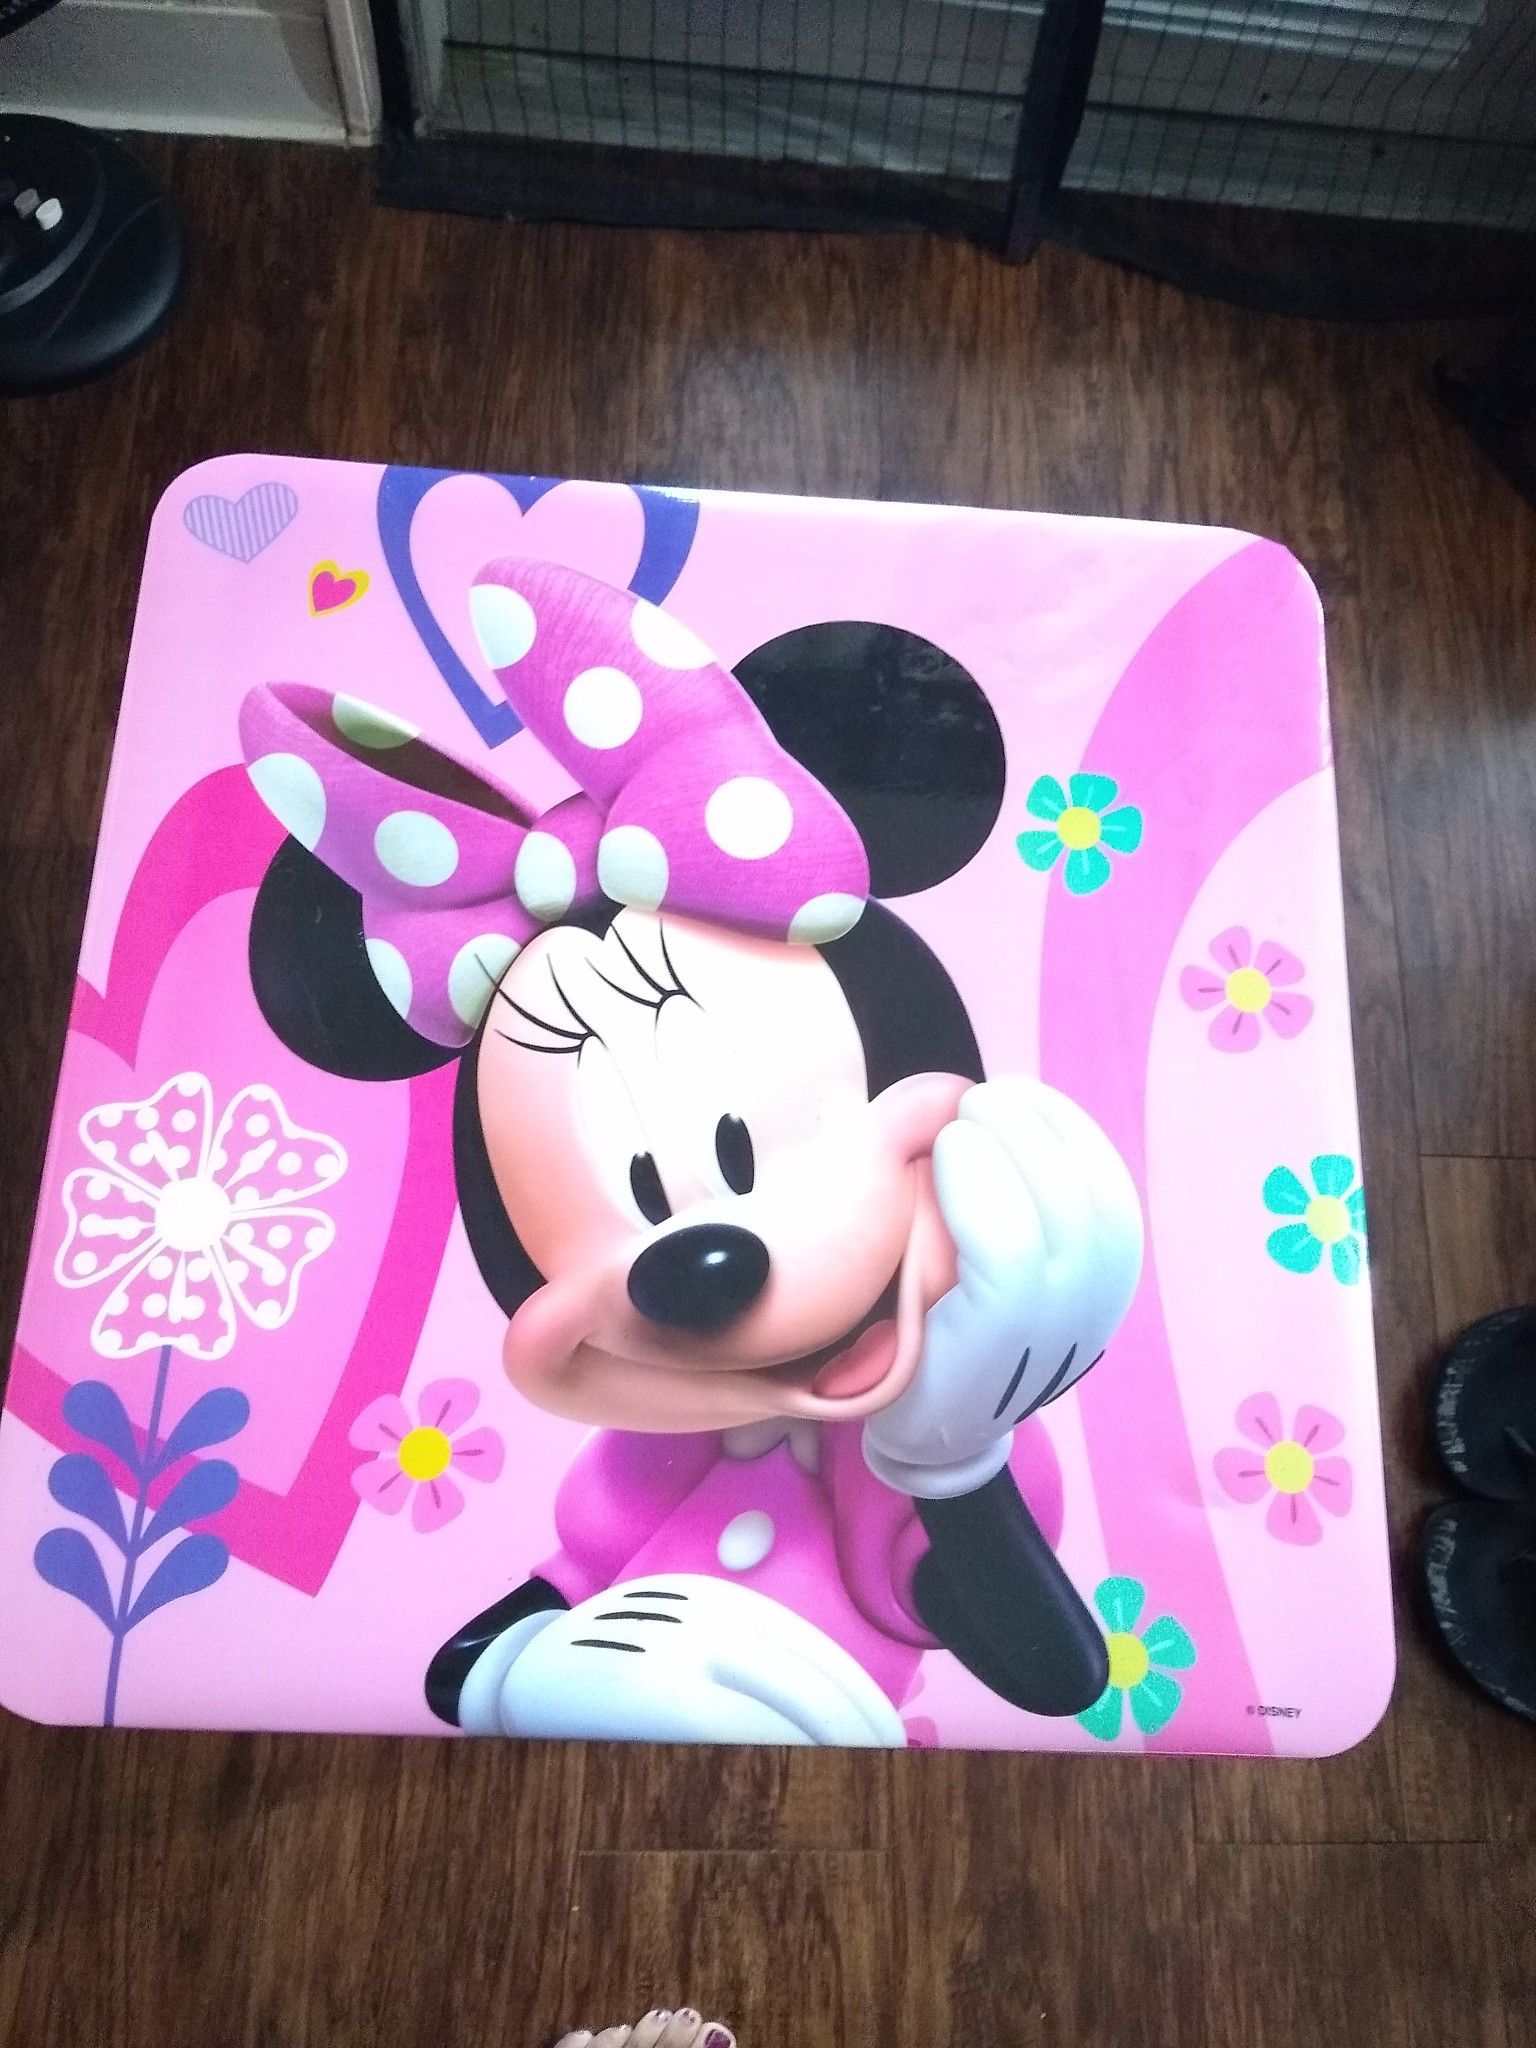 Kid's Minnie mouse table with the this free 1 red color plastic chair